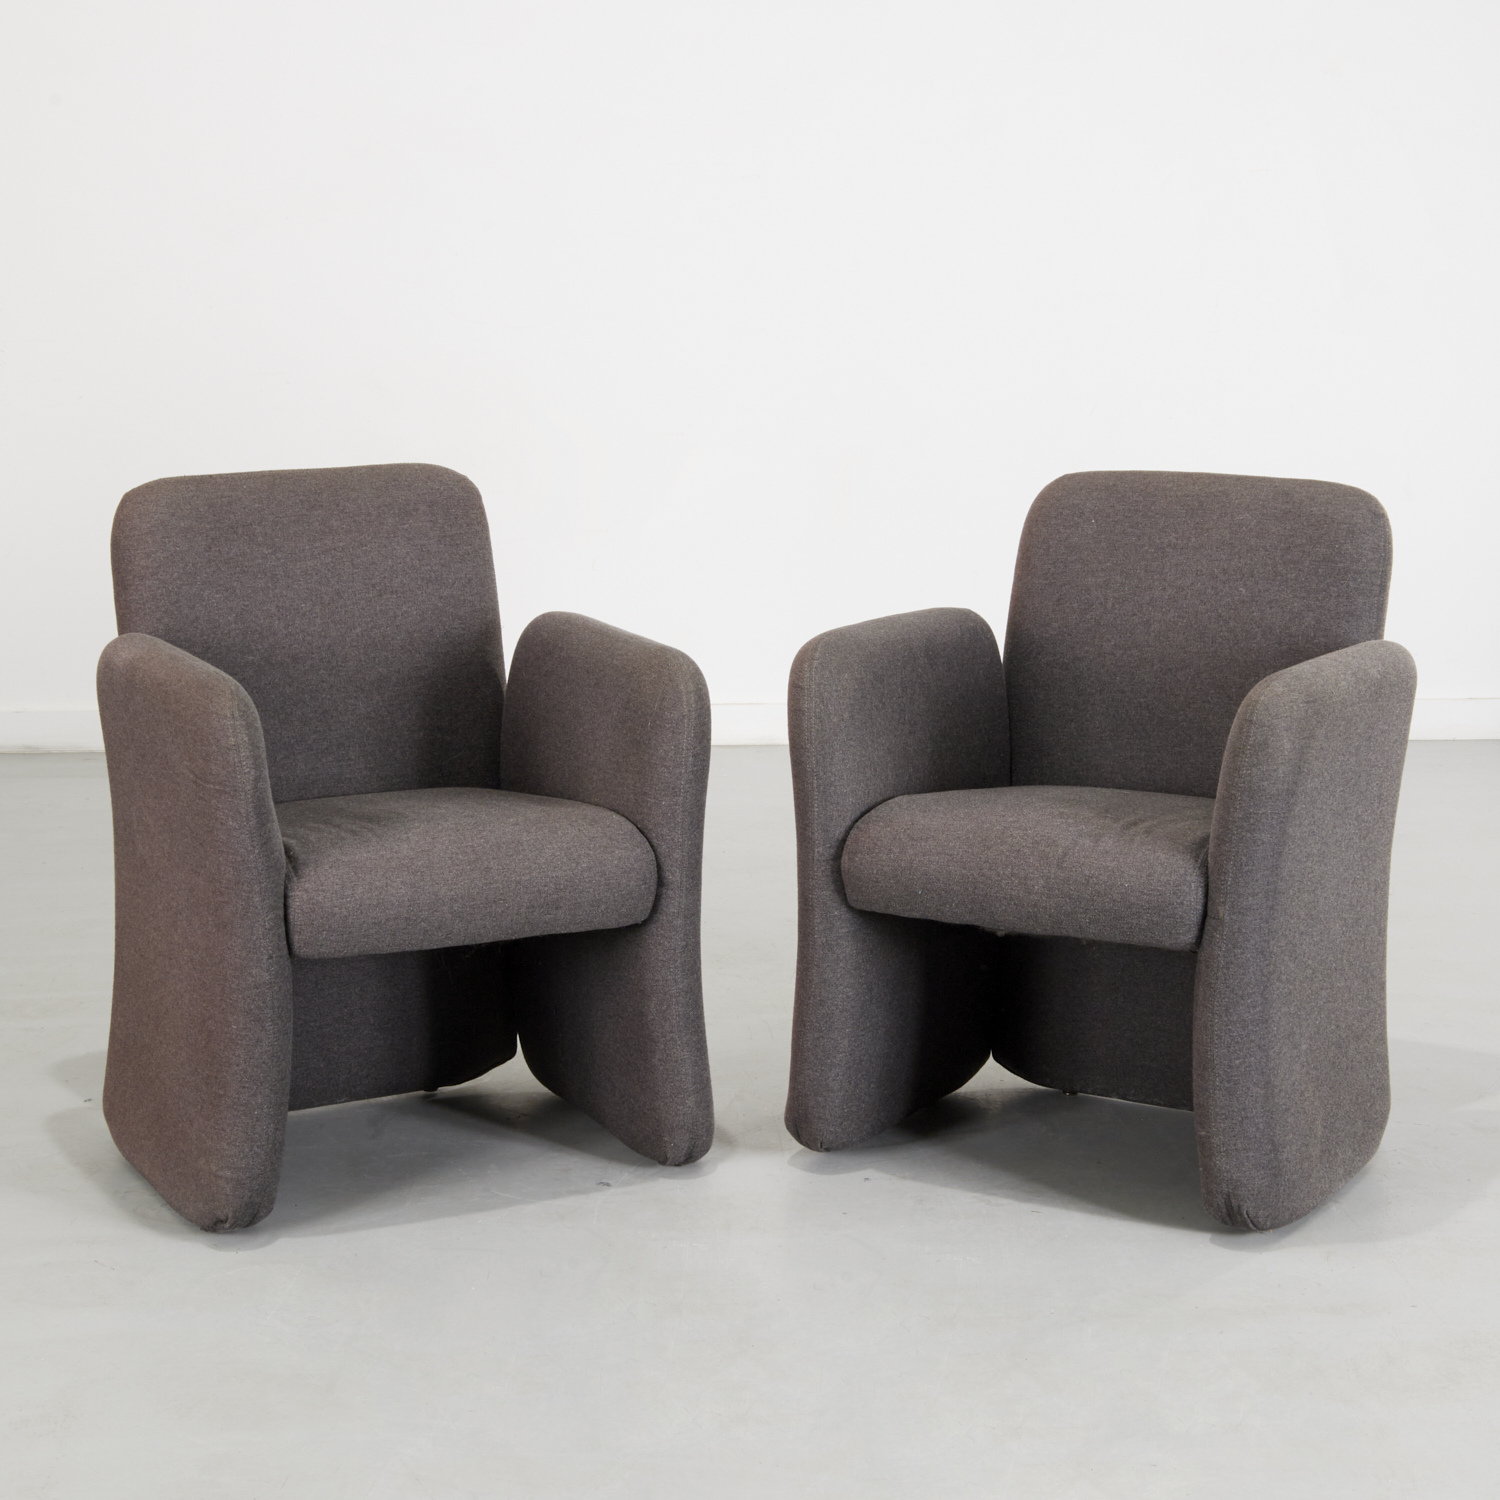 PAIR CHICLET STYLE UPHOLSTERED 2fc4a7